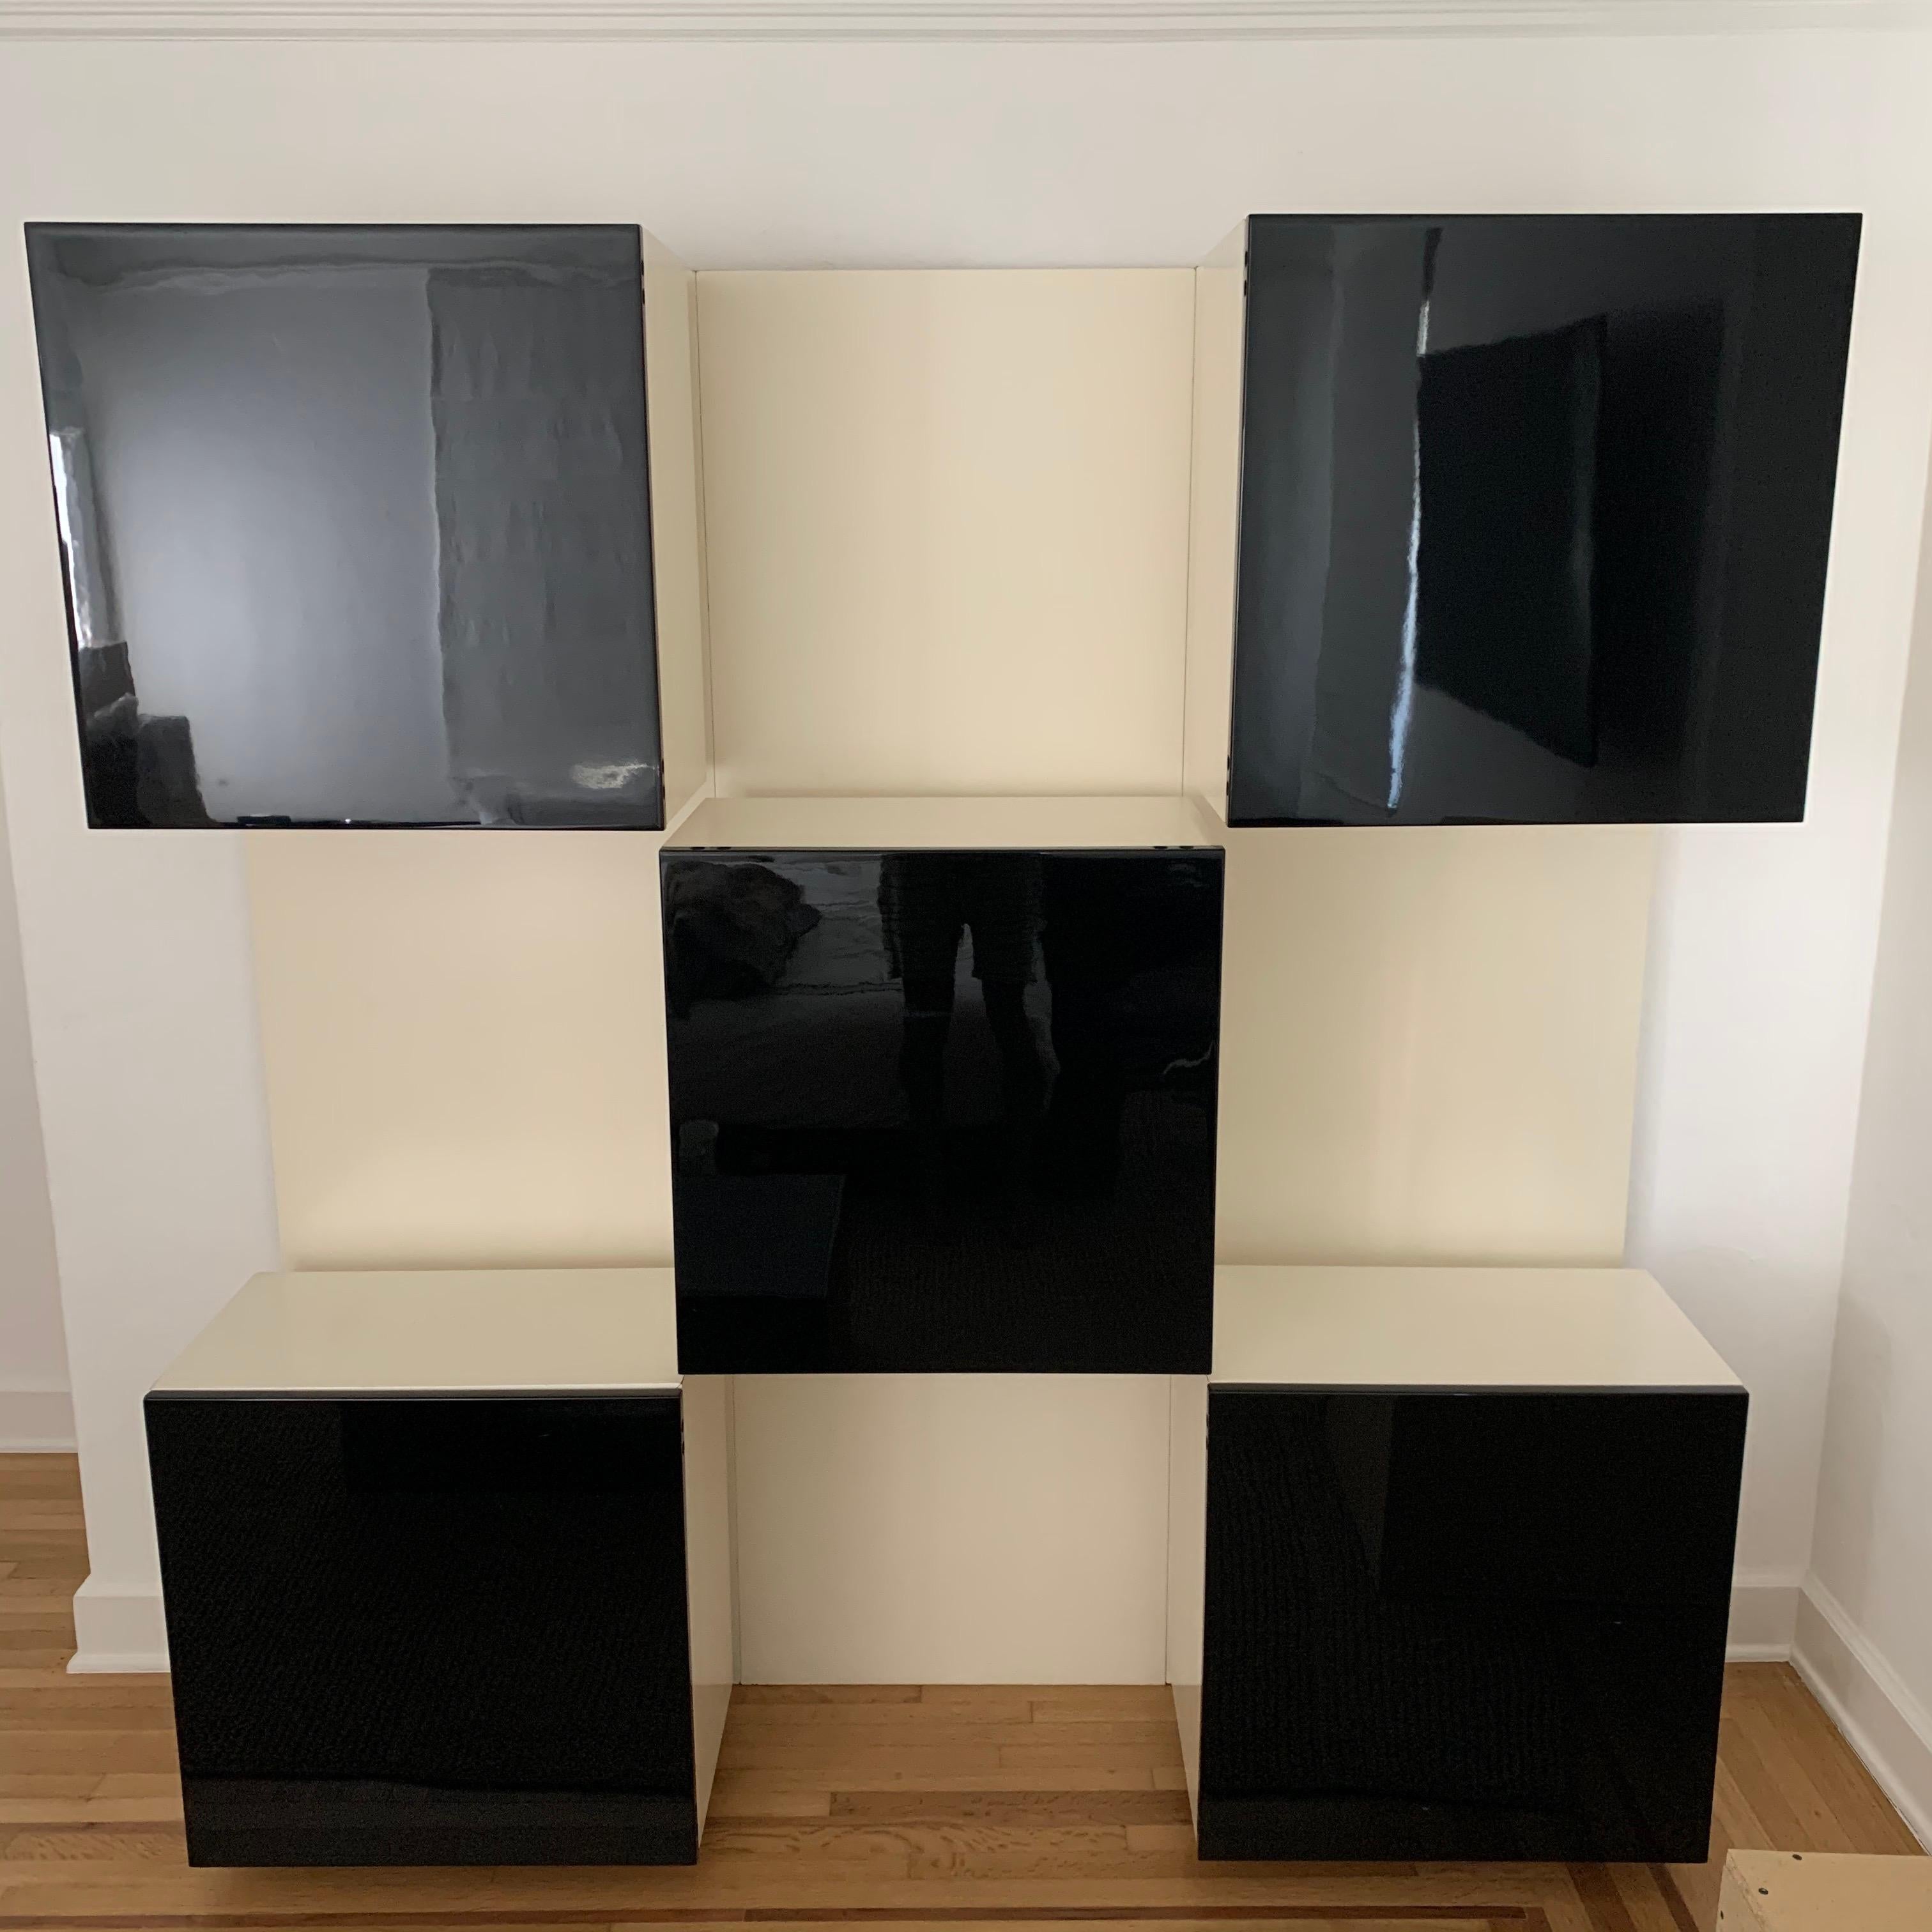 wall-mounted shelving and storage unit, illuminated and backlit creating intriguing lighting for displayed pieces as well as functional lighting for the items inside the cabinets. Rendered in a matte white frame and case with 5 gloss black lacquered